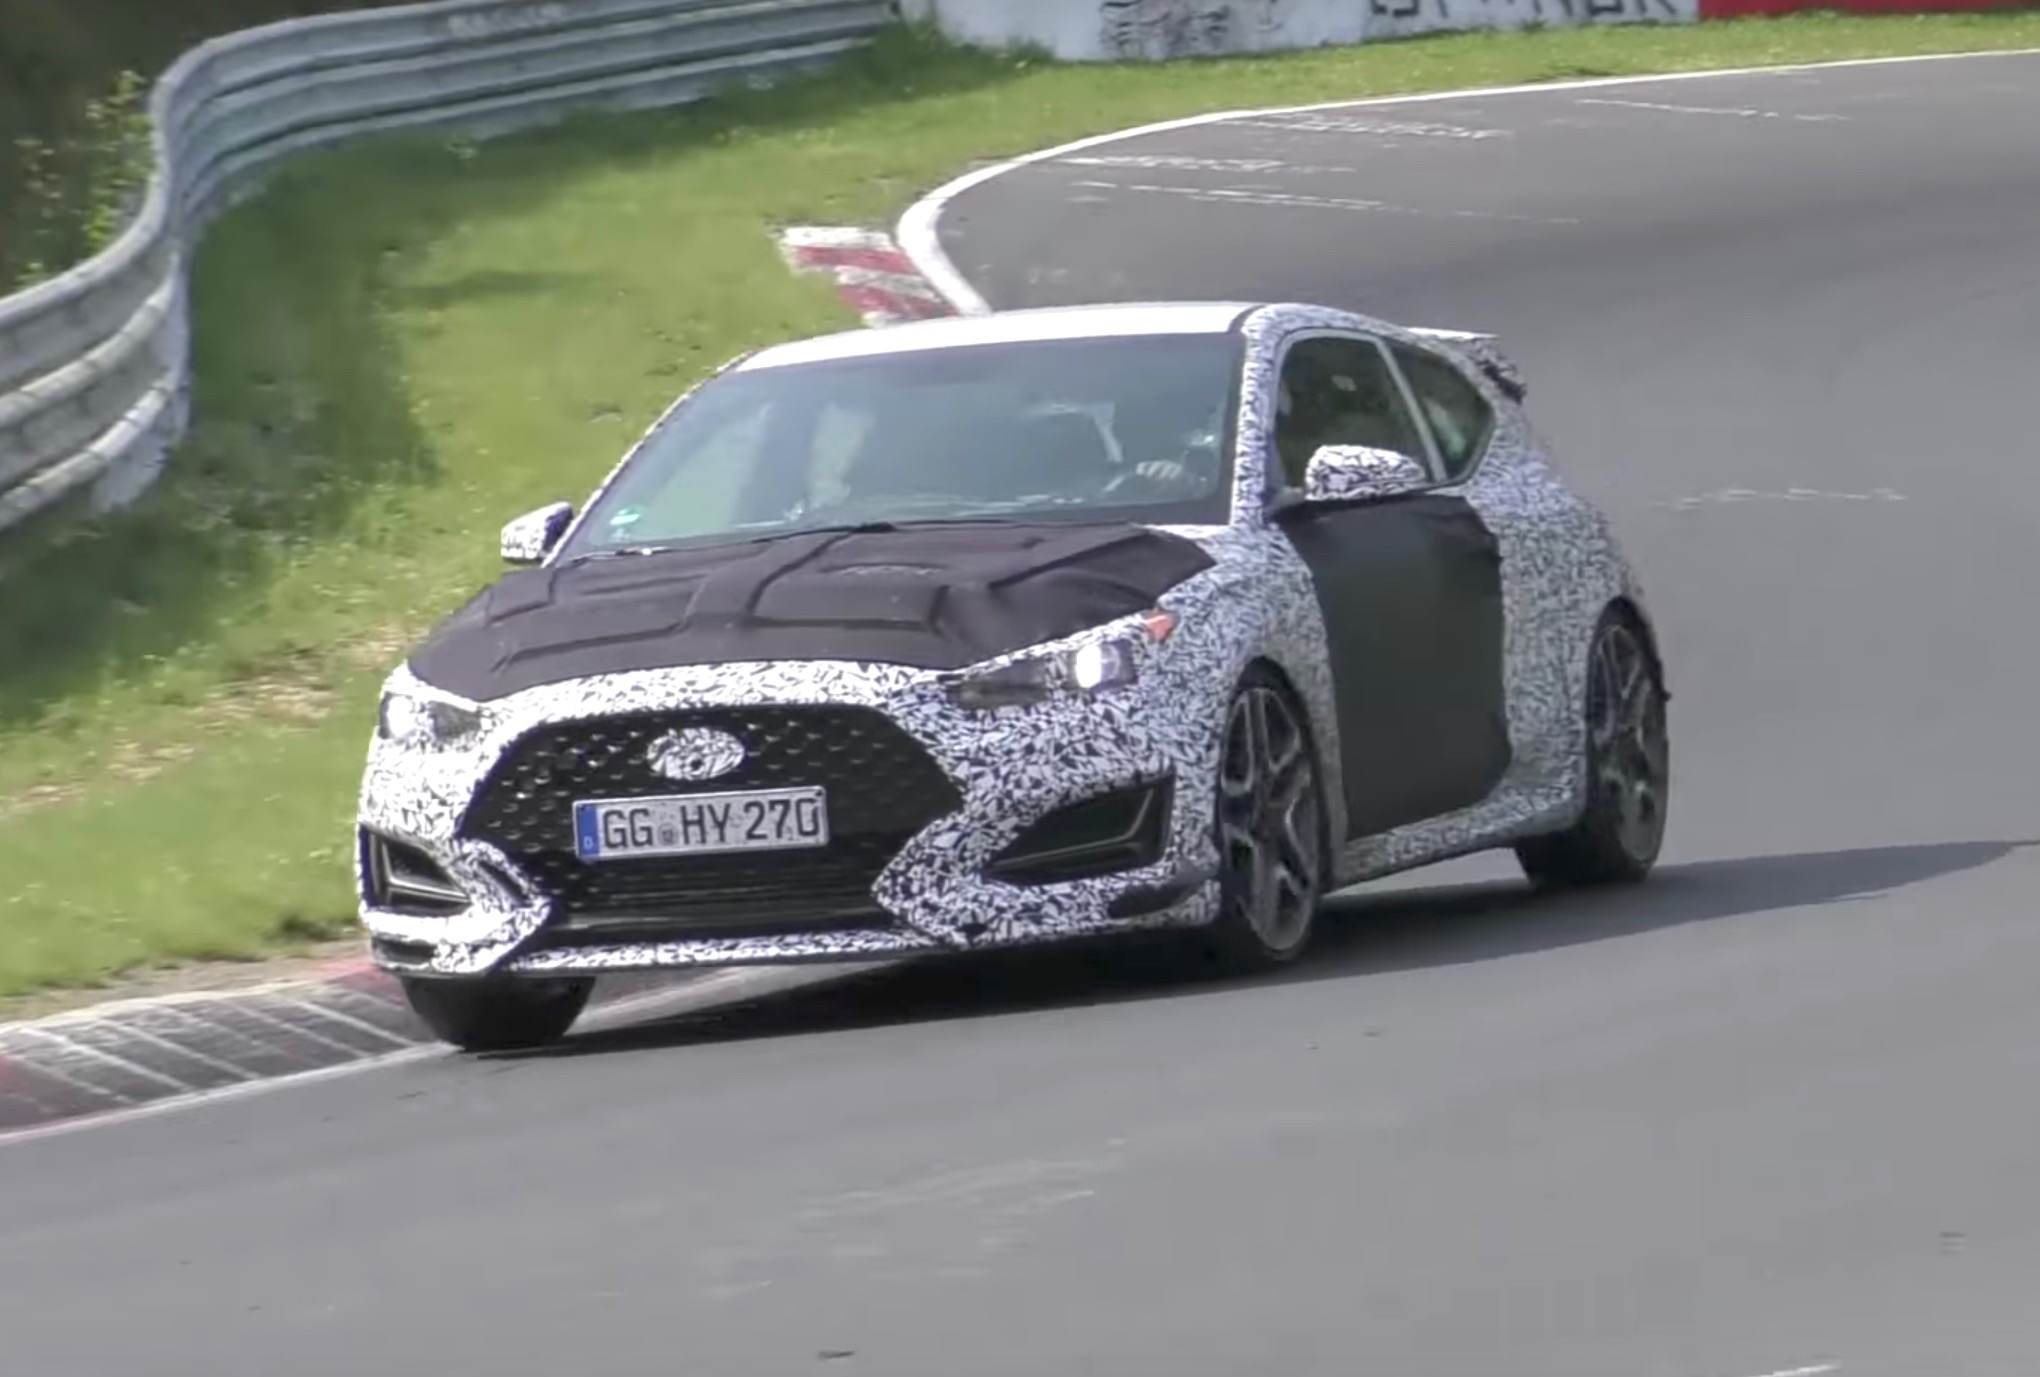 Hyundai Veloster N hot hatch spotted, wears 2018 body design (video)